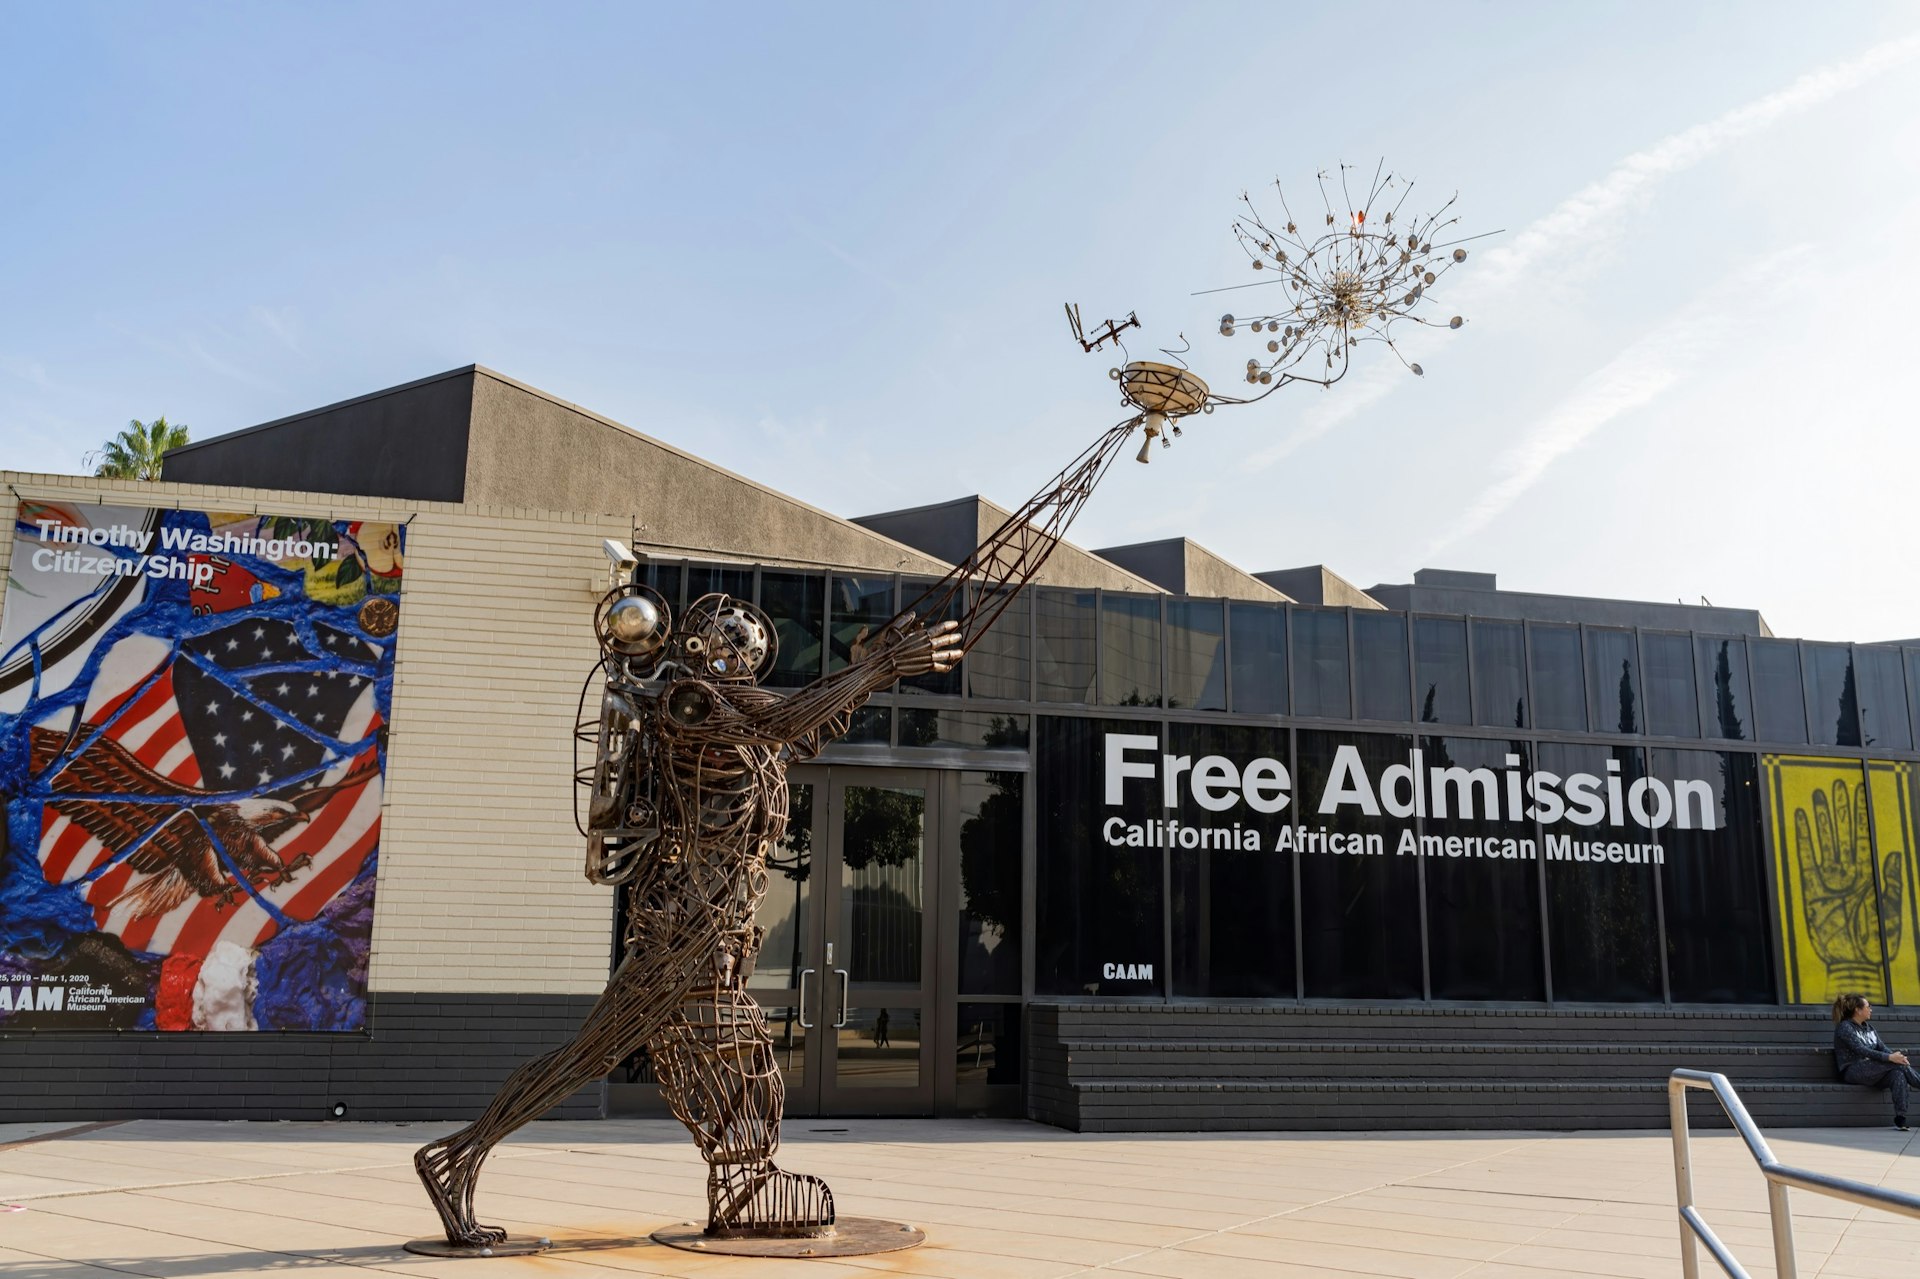 A large wire statue in the form of an astronaut releasing something into the air